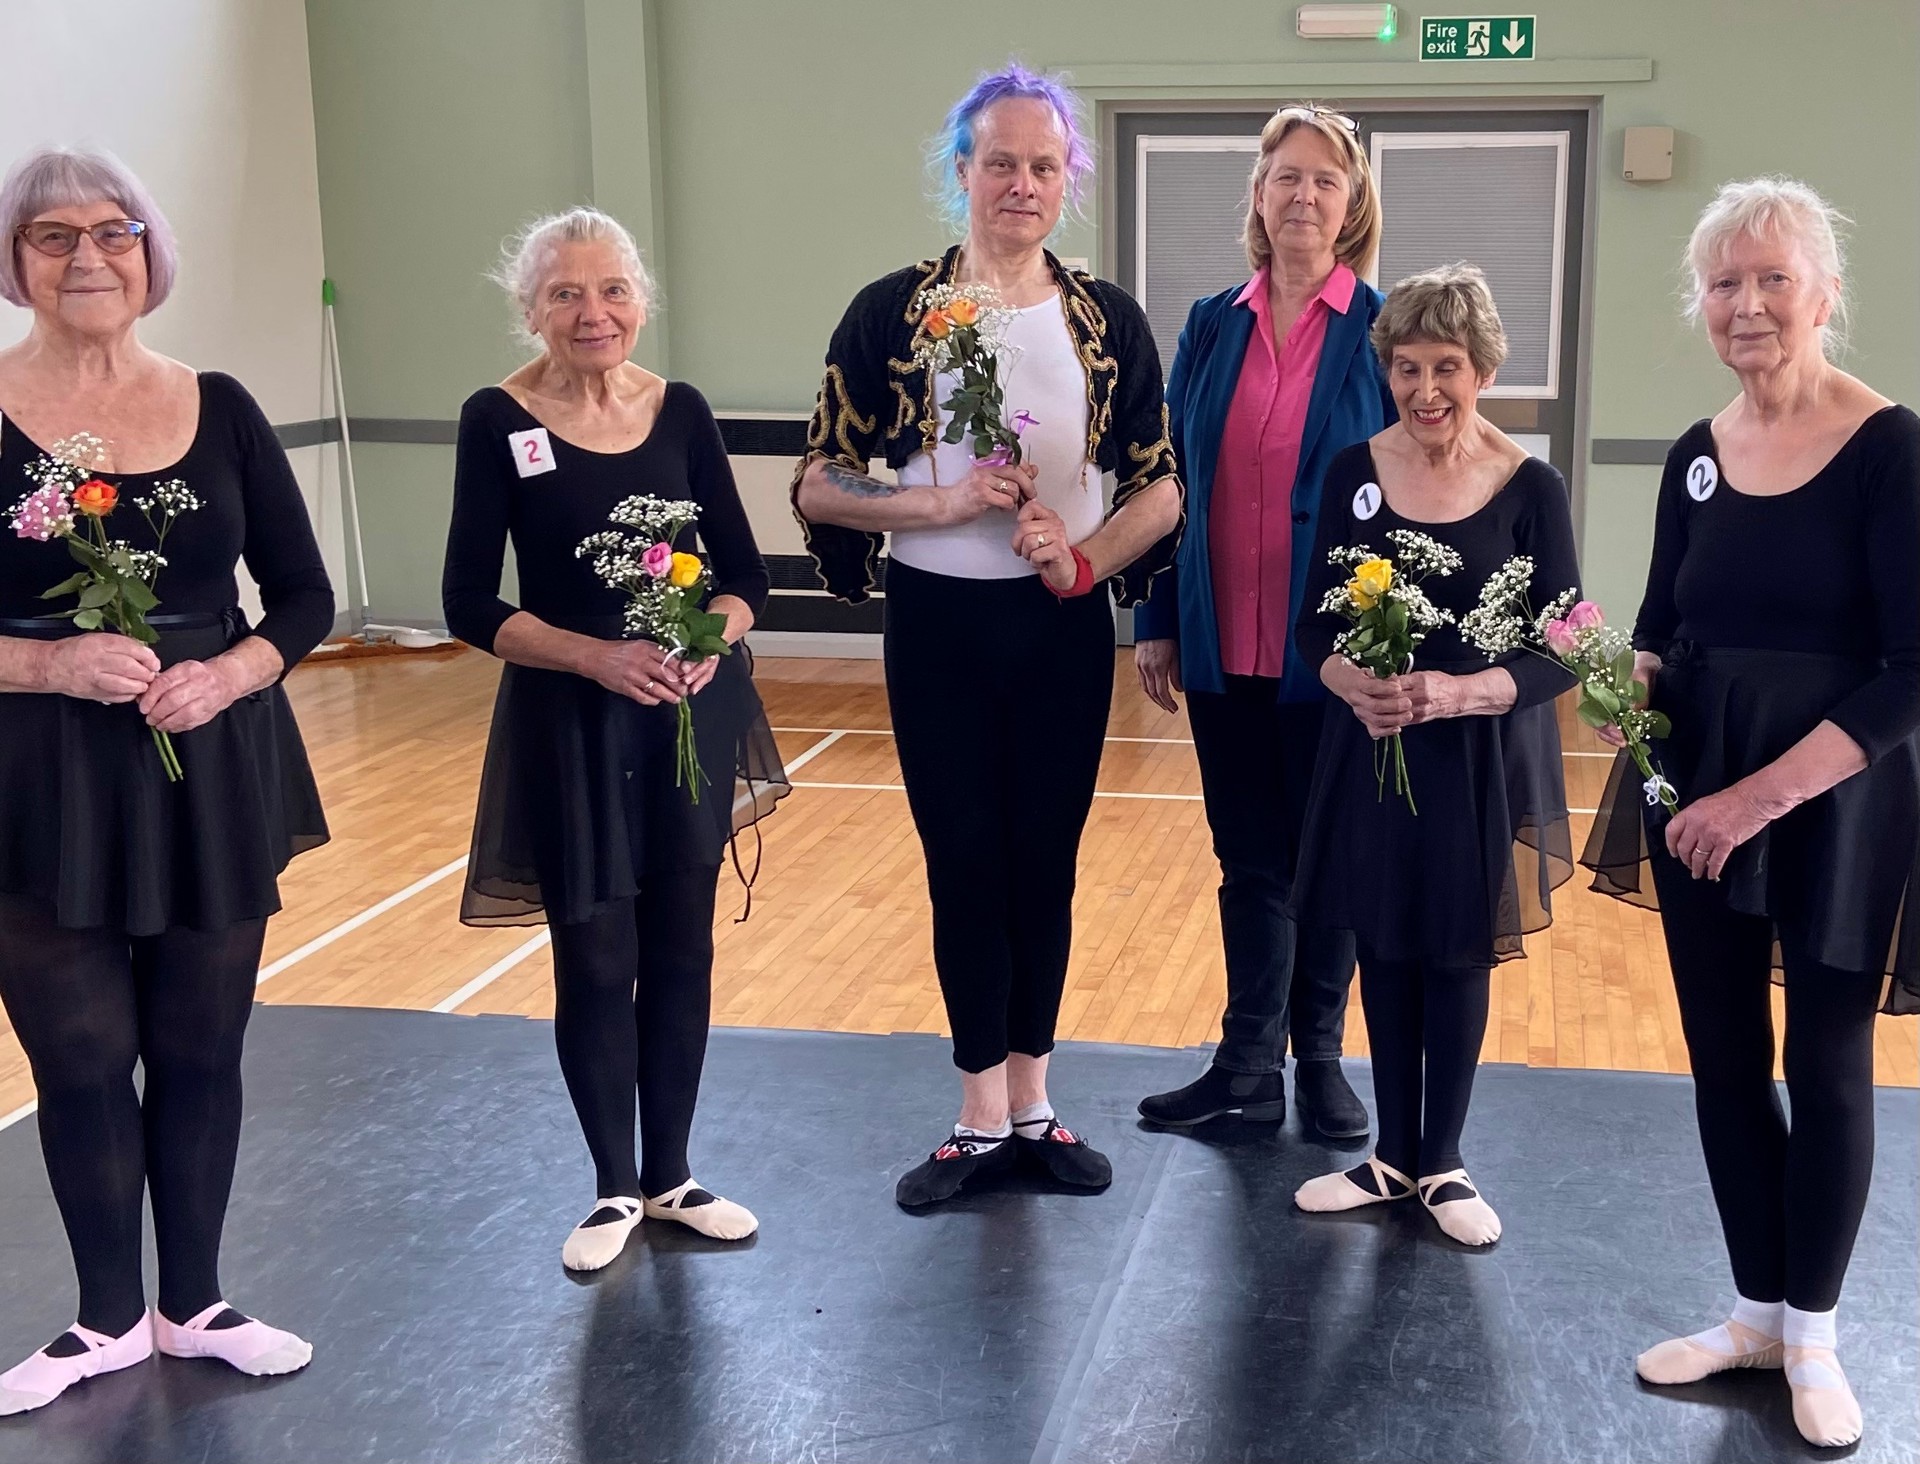 Six older white Bbodance dancers wearing black ballet costumes holding flowers and looking at the camera. In a dance studio,